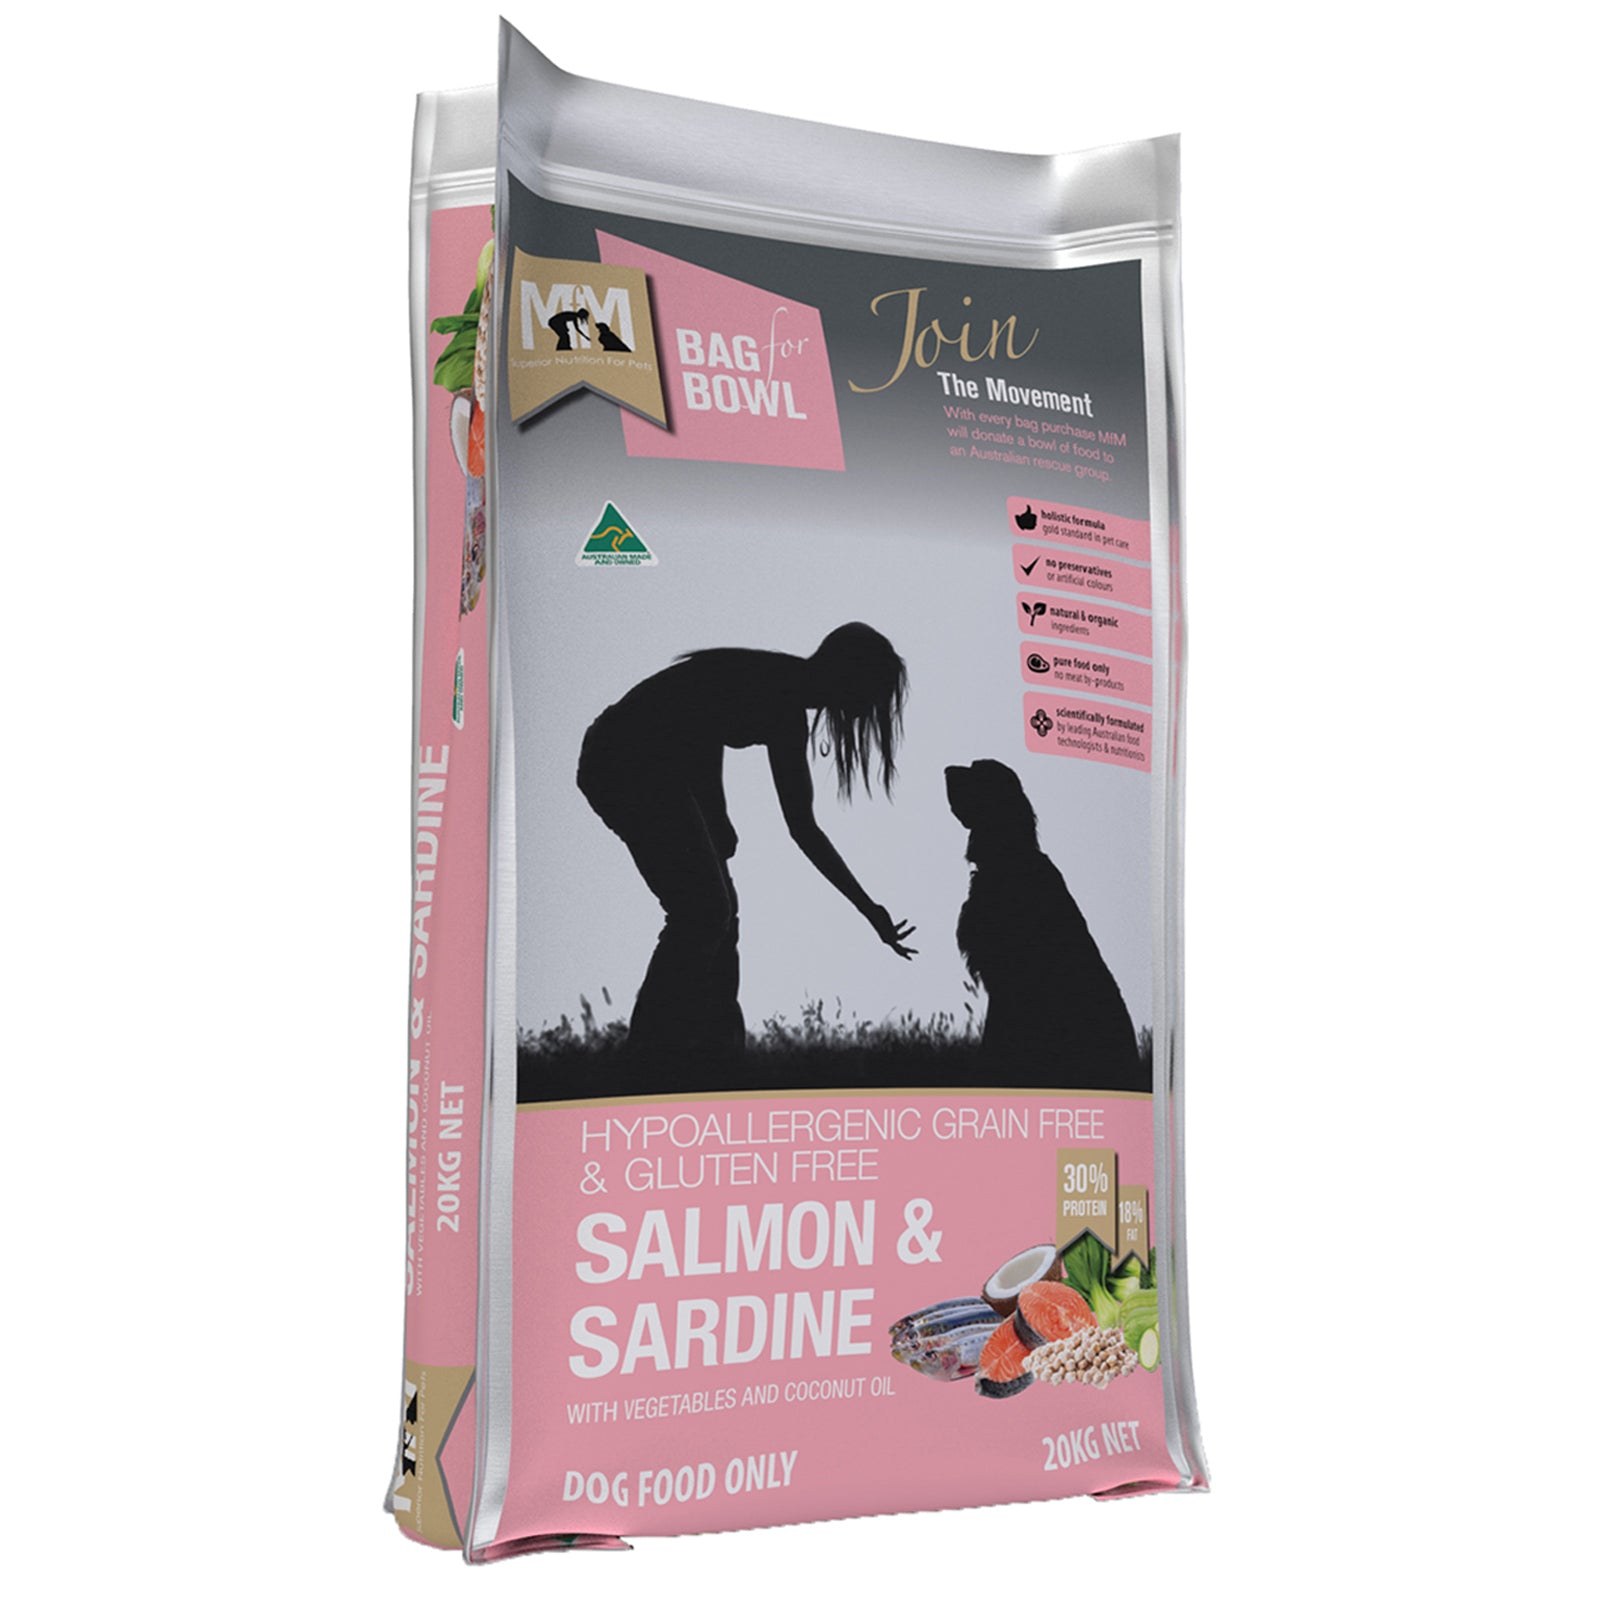 Meals for Mutts Grain and Gluten Free Salmon & Sardine | Pet Food Leaders